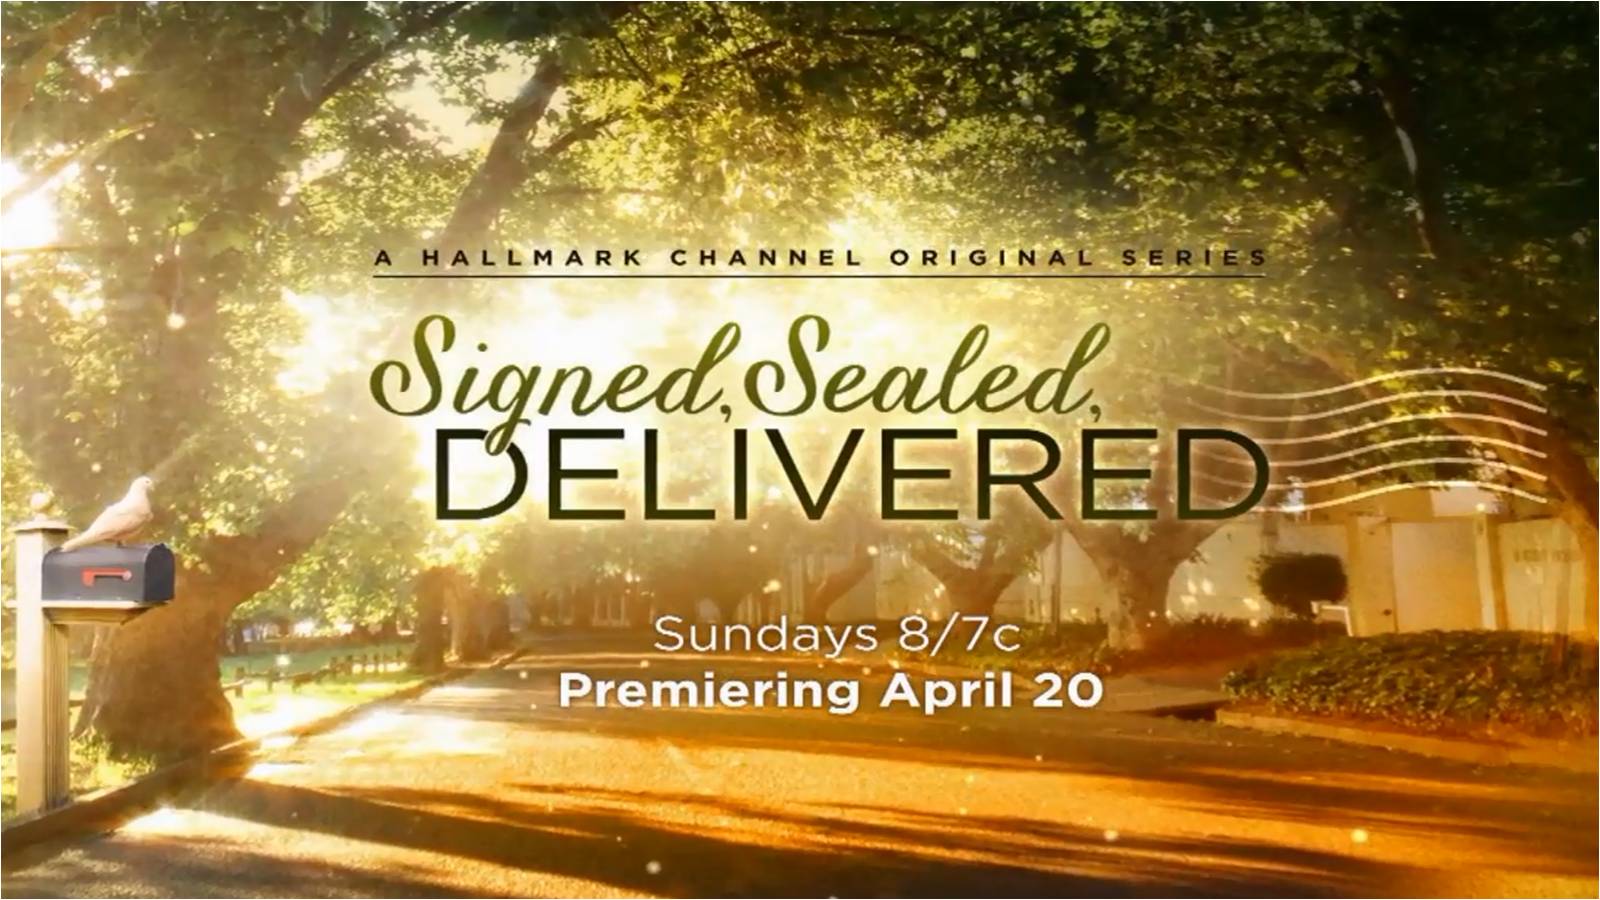 Watch the Trailers for Signed, Sealed Delivered Martha Williamson's